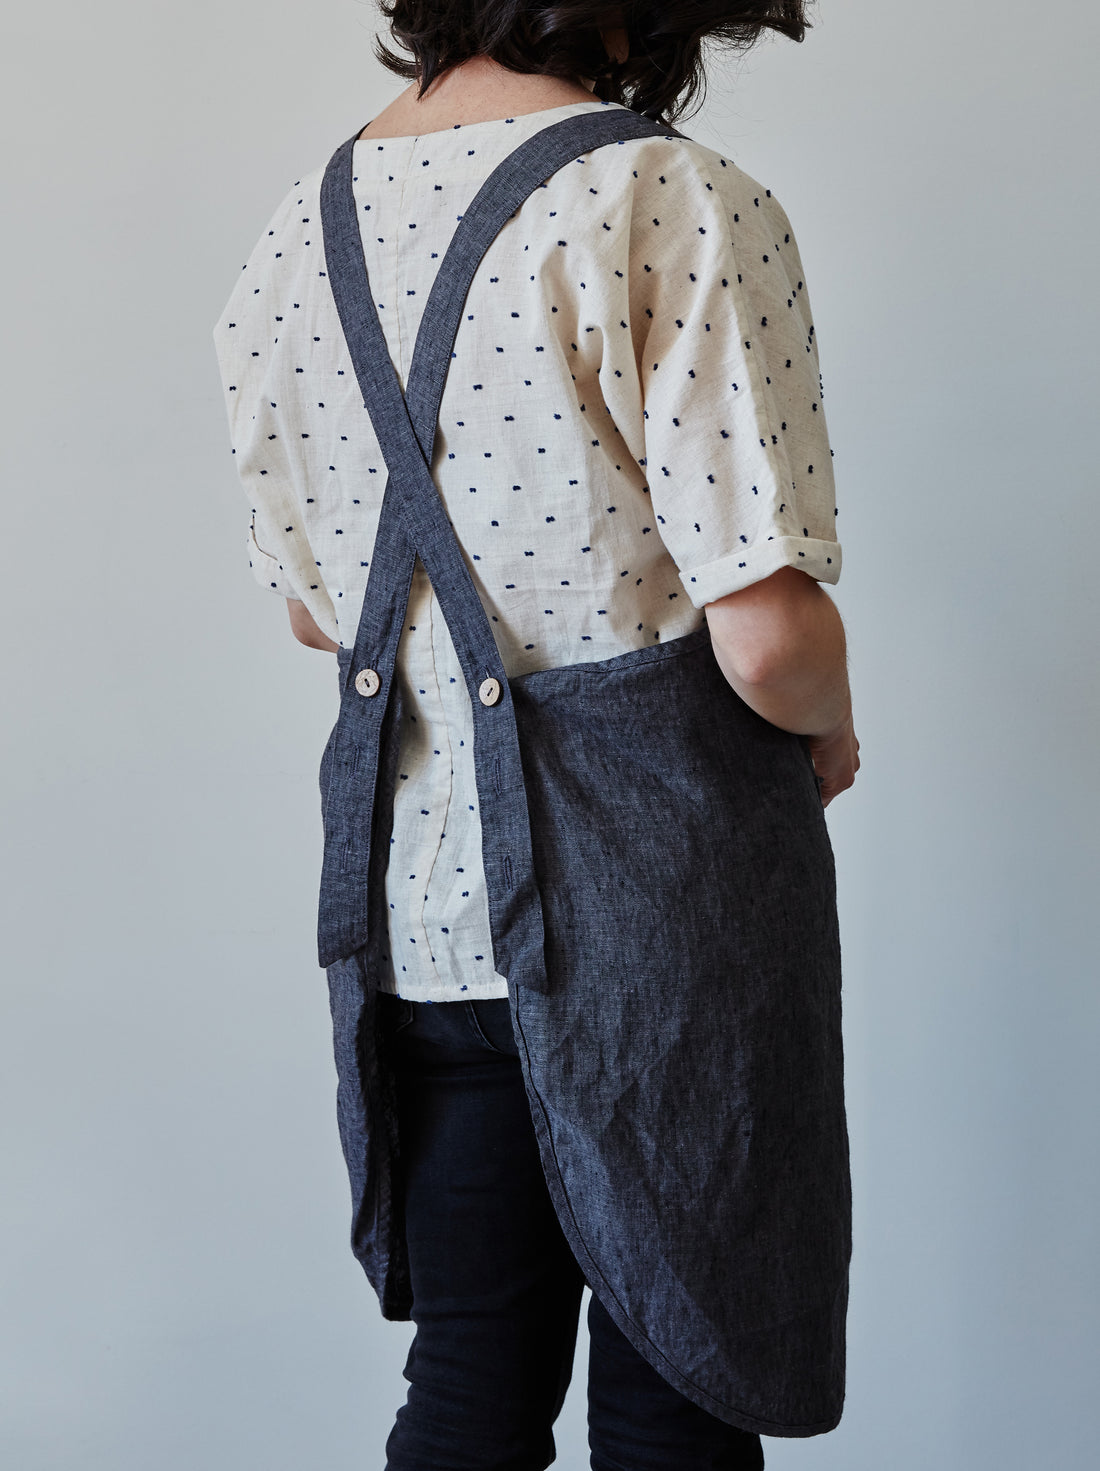 Why our pinafore aprons are best sellers?